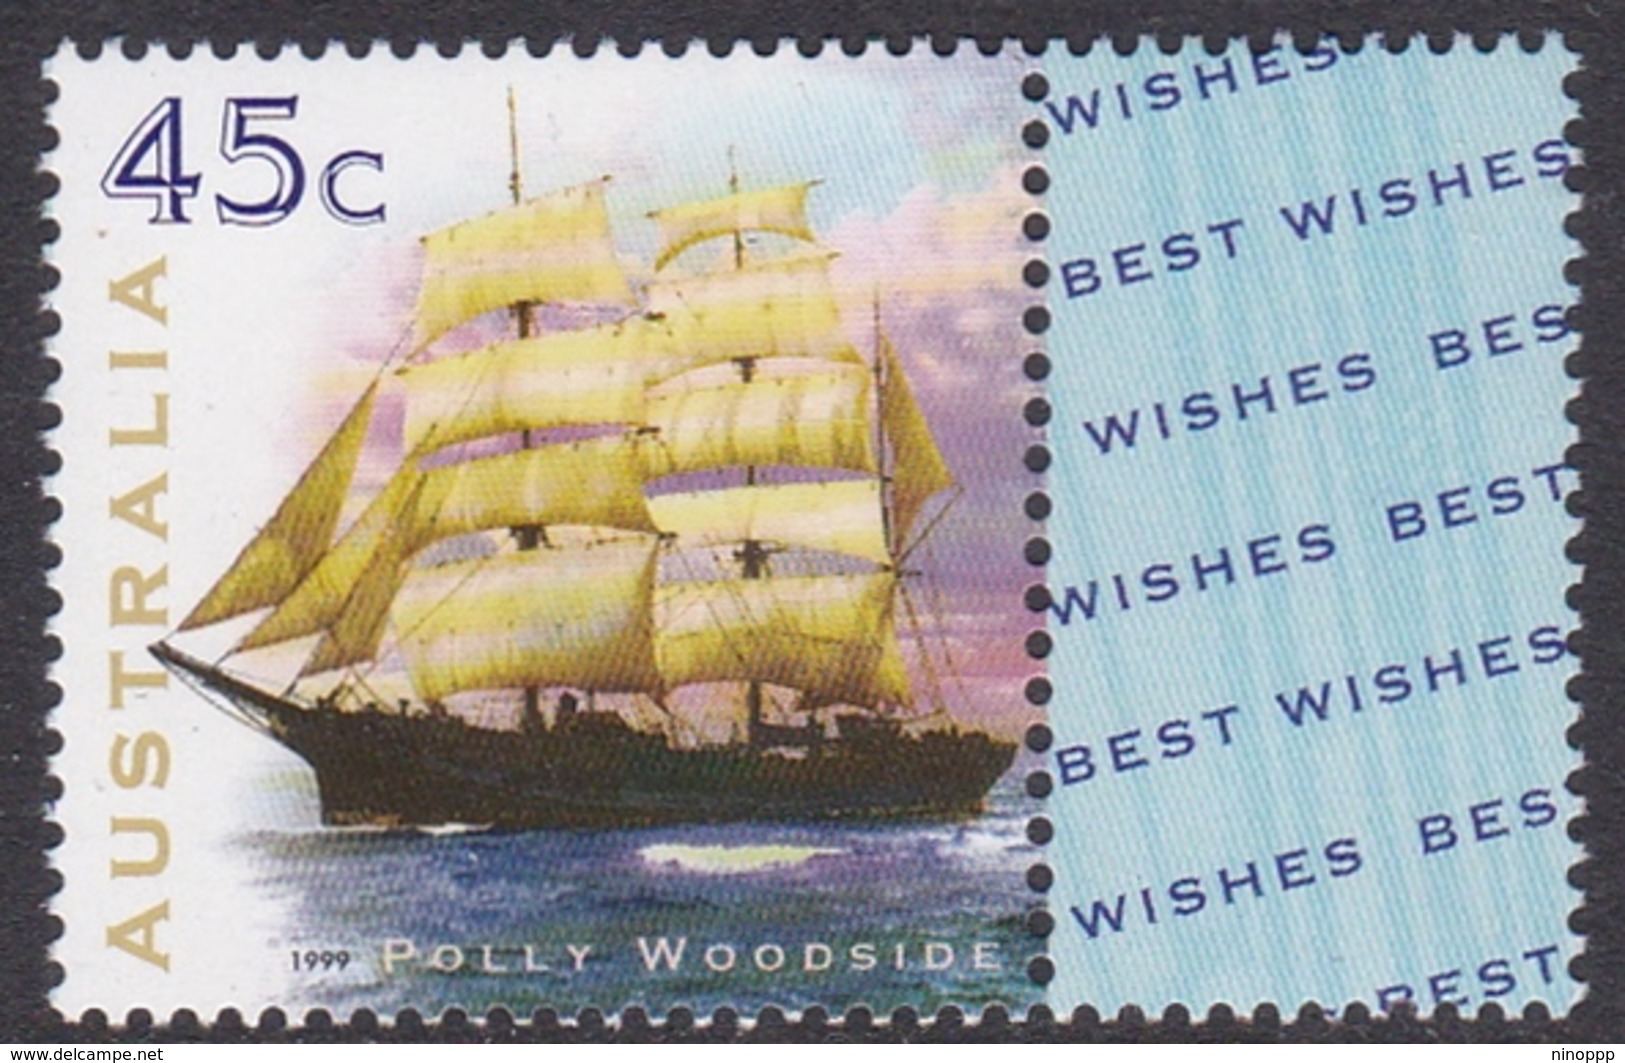 Australia ASC 1722a 1999 Sailing Ships, Polly Woodside, Mint Never Hinged - Mint Stamps